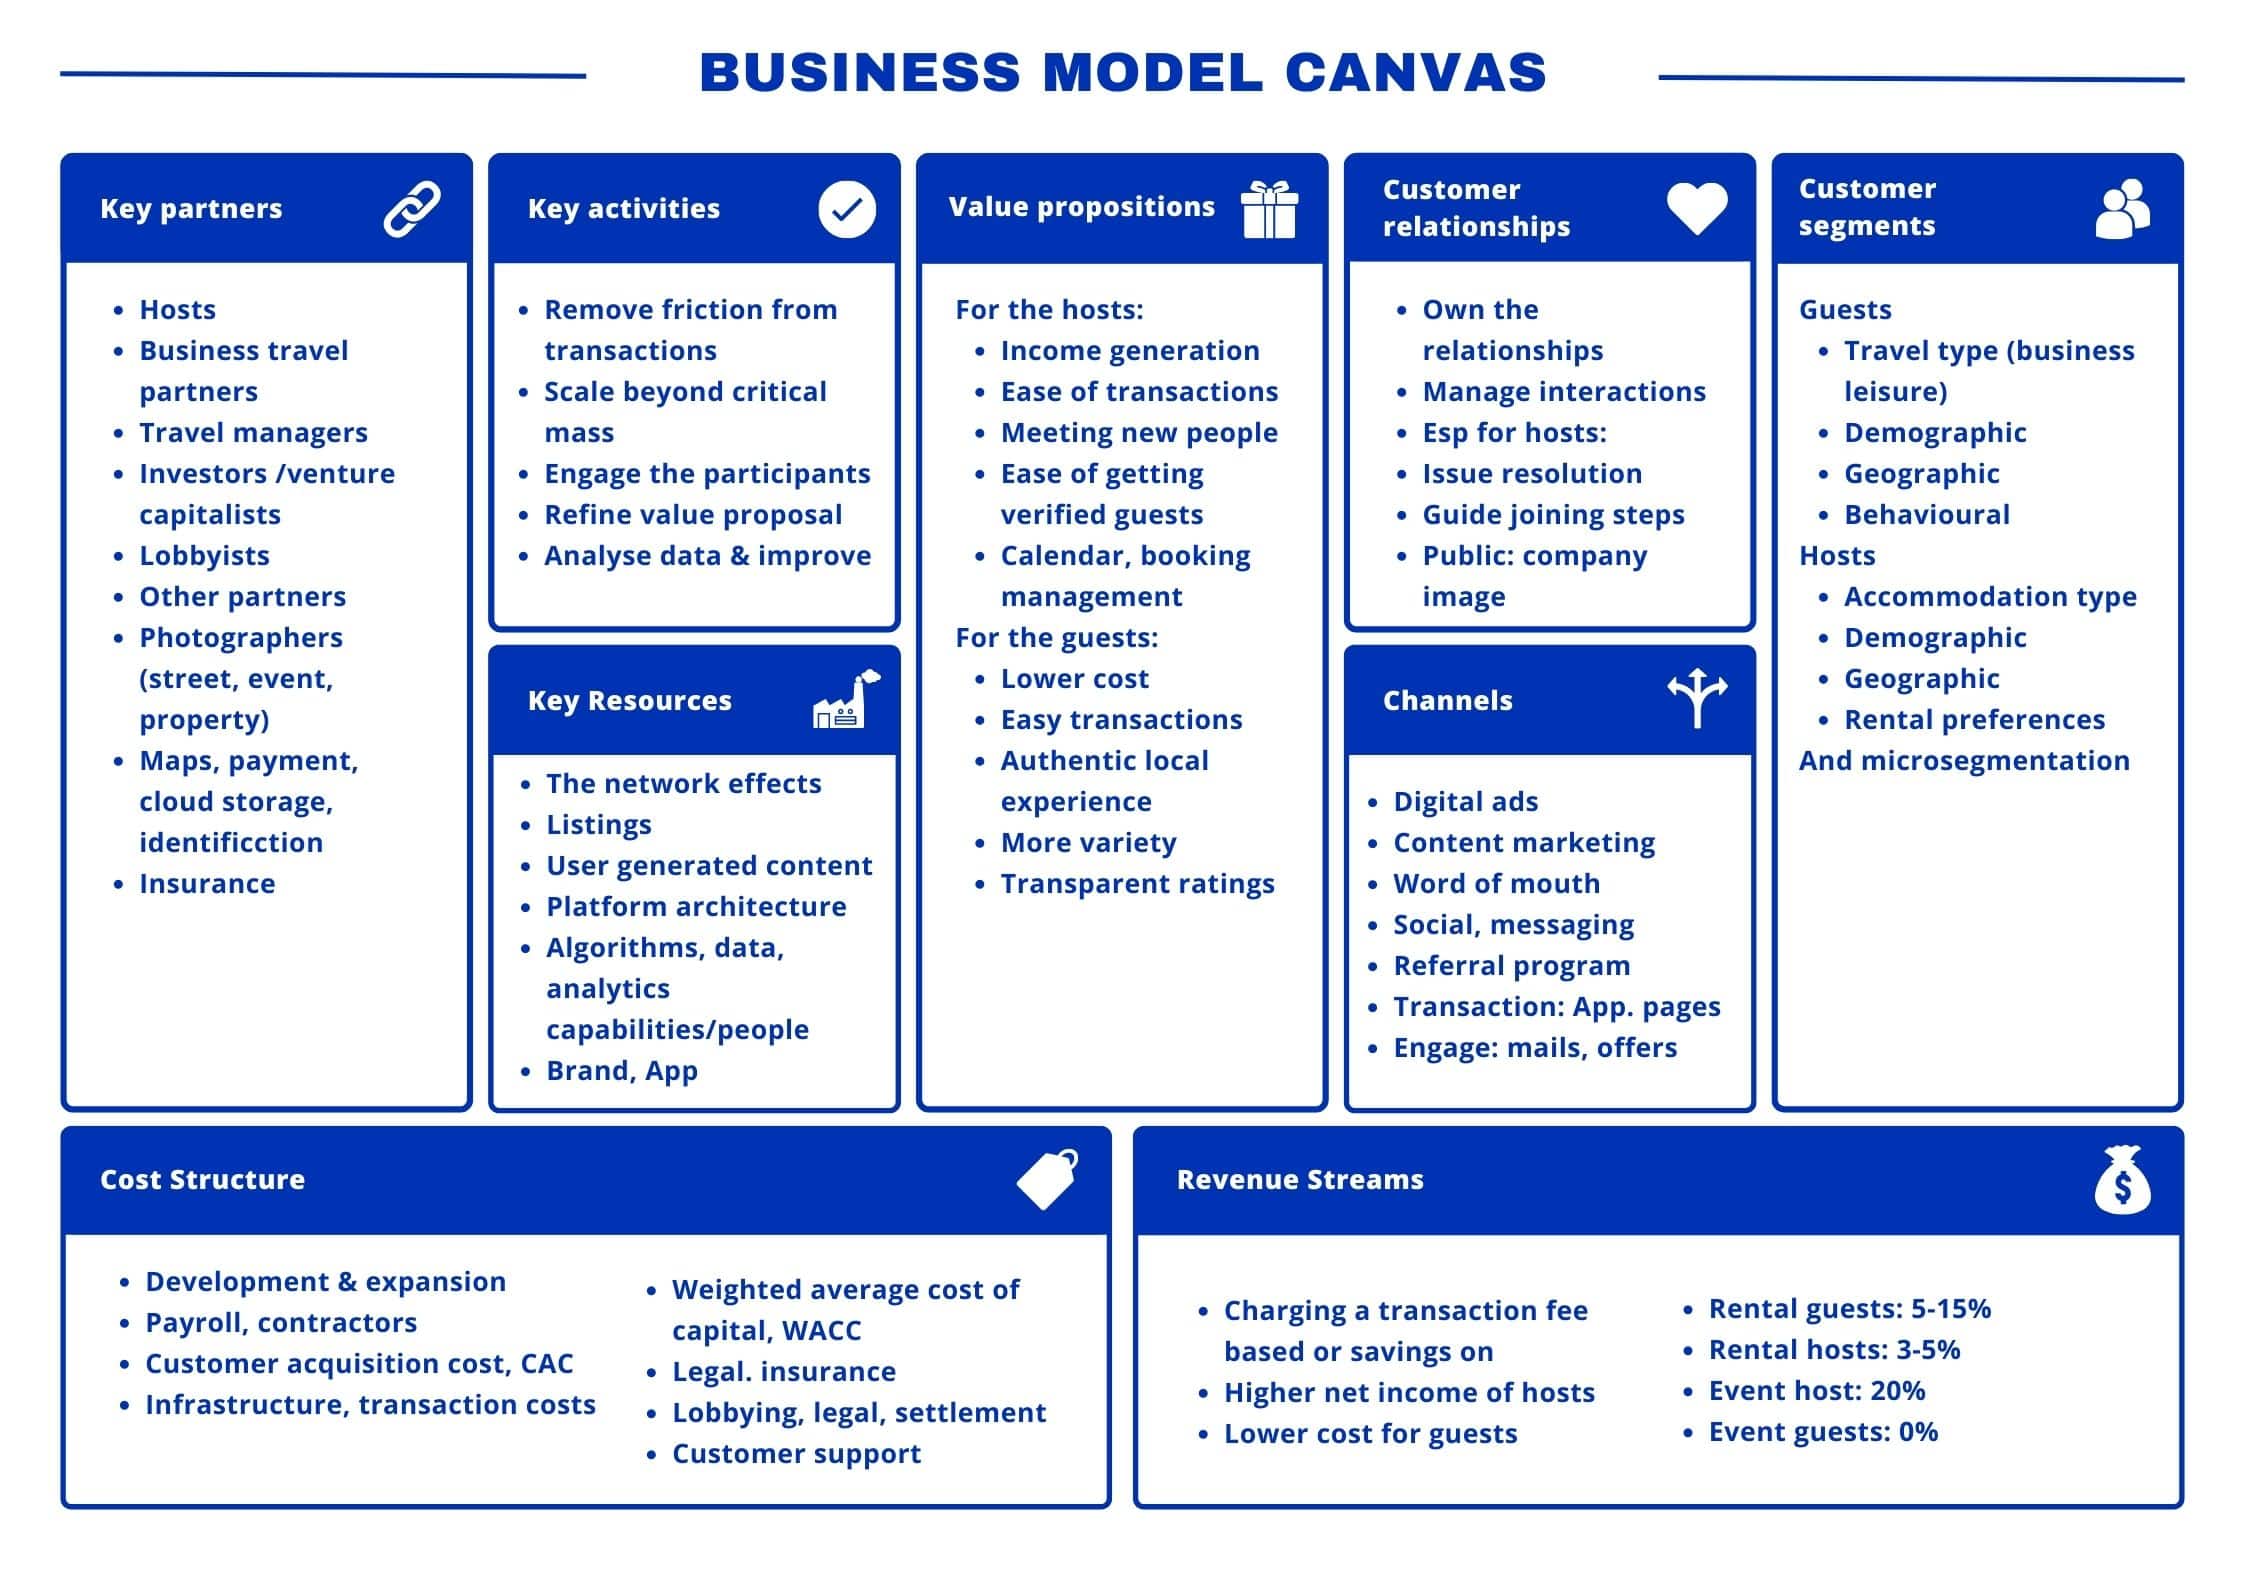 Business Model Canvas Airbnb